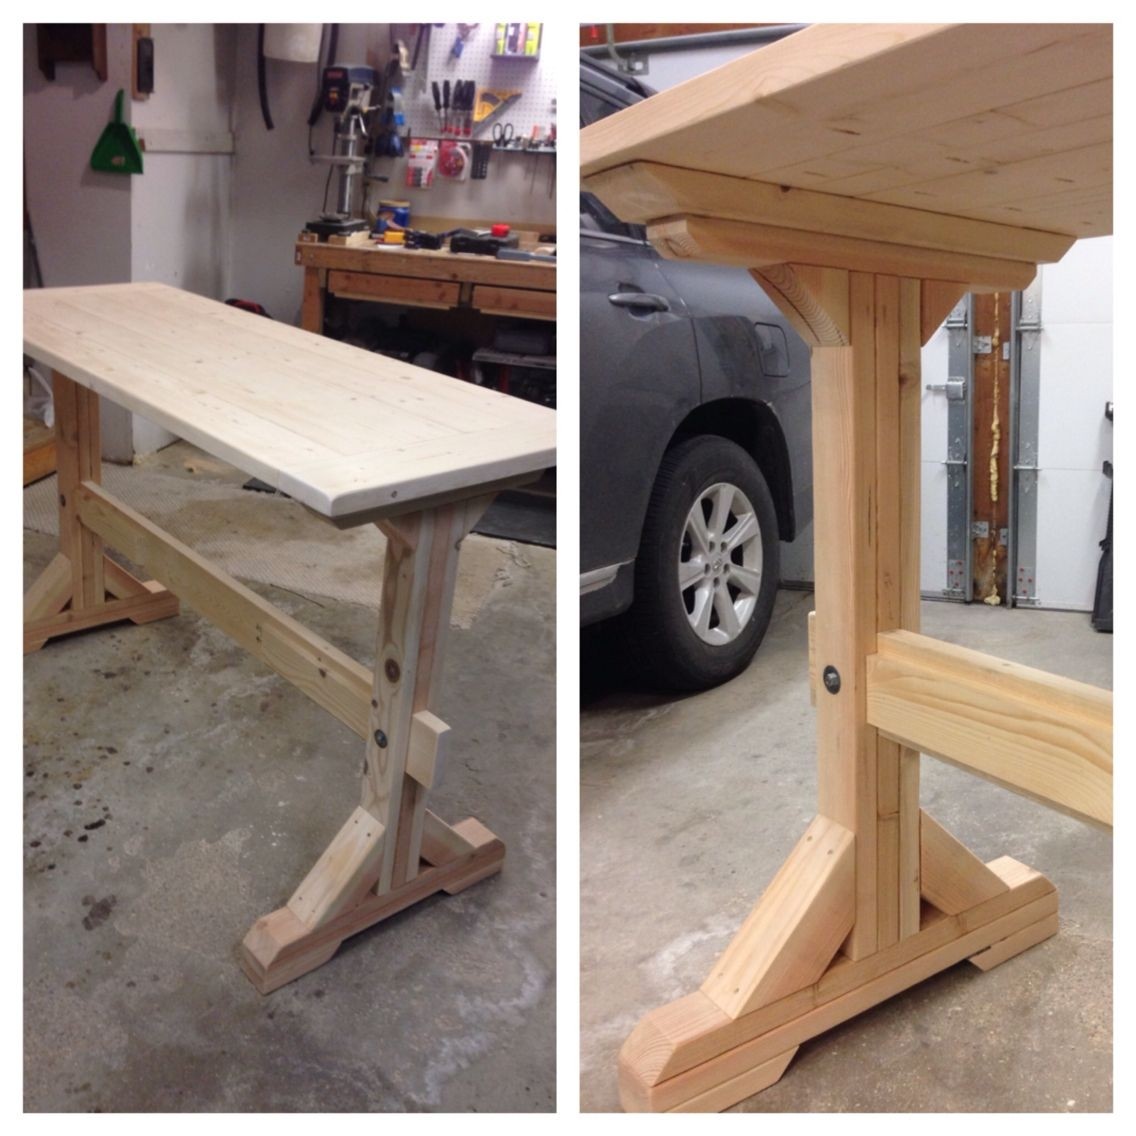 Pub table i made from 2x6 2x4 and 4x4 dimensional